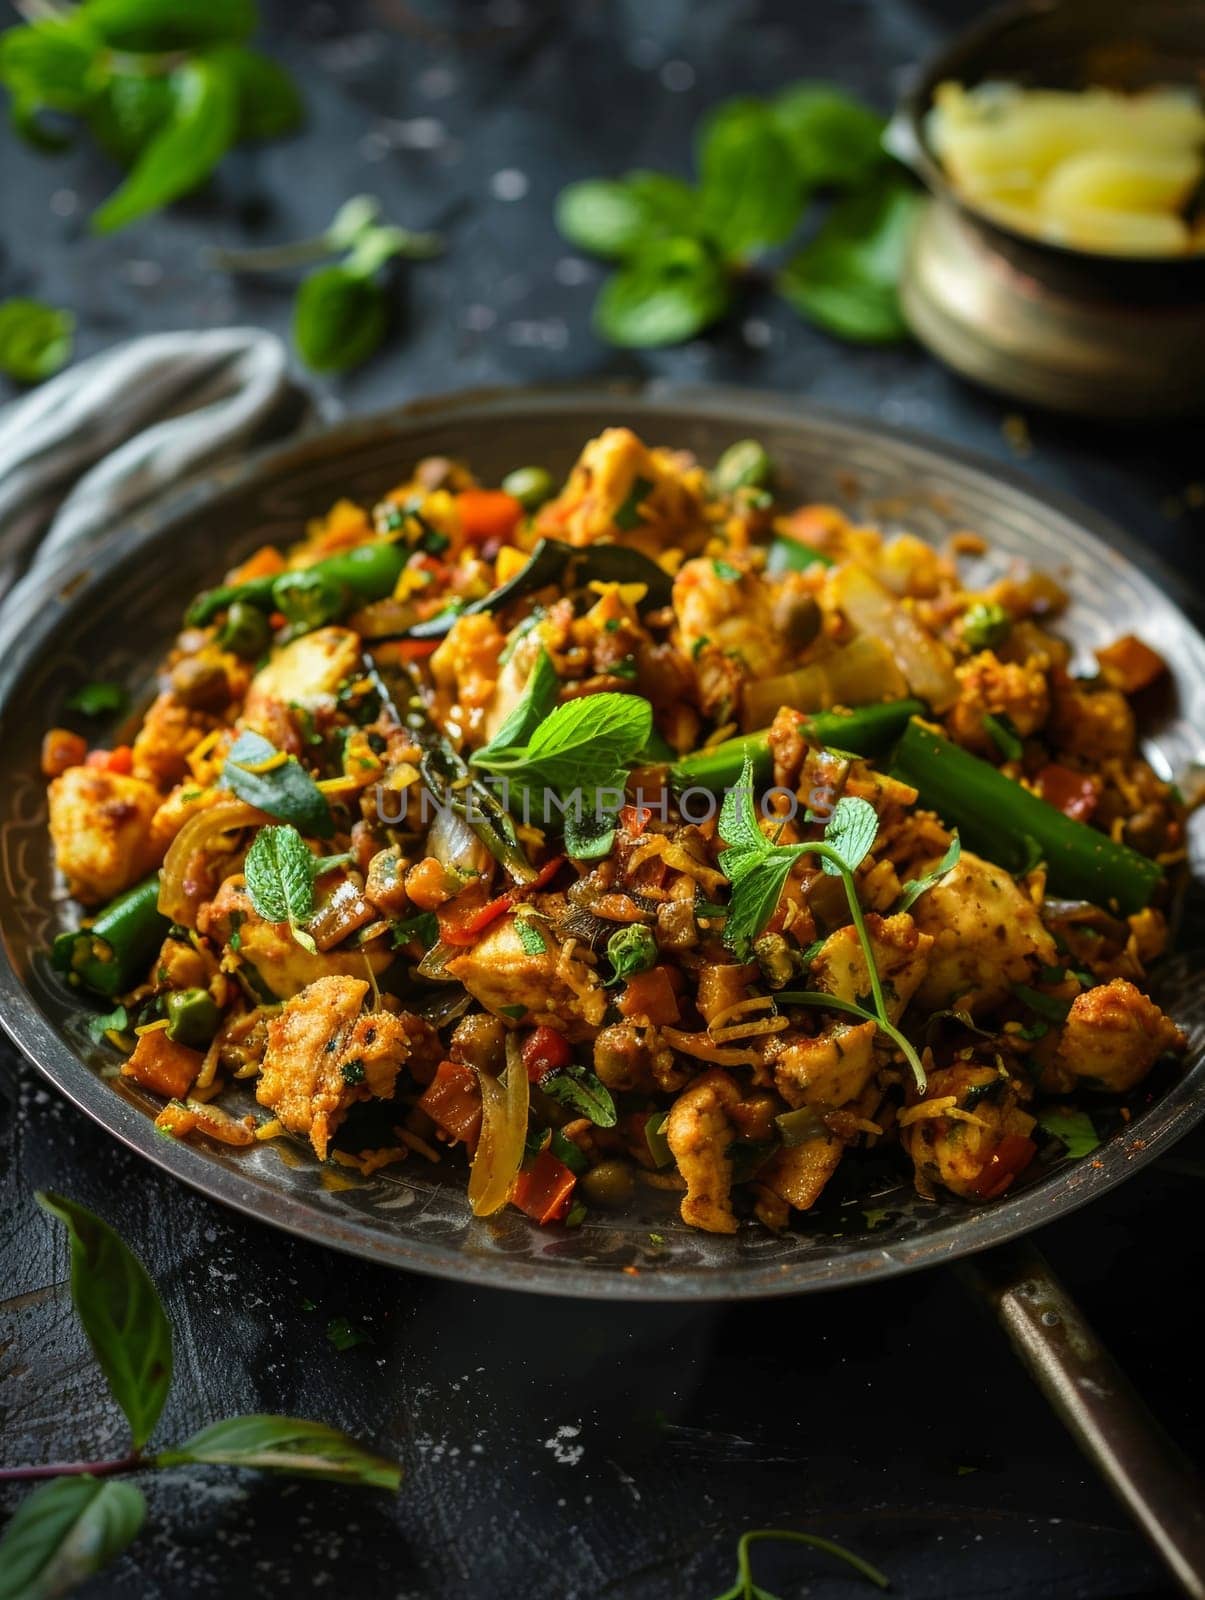 Sri Lankan kottu, a flavorful stir-fry of chopped roti bread, vegetables, and chicken, served on a metal plate. This vibrant and aromatic dish showcases the bold, spicy tastes of traditional cuisine. by sfinks